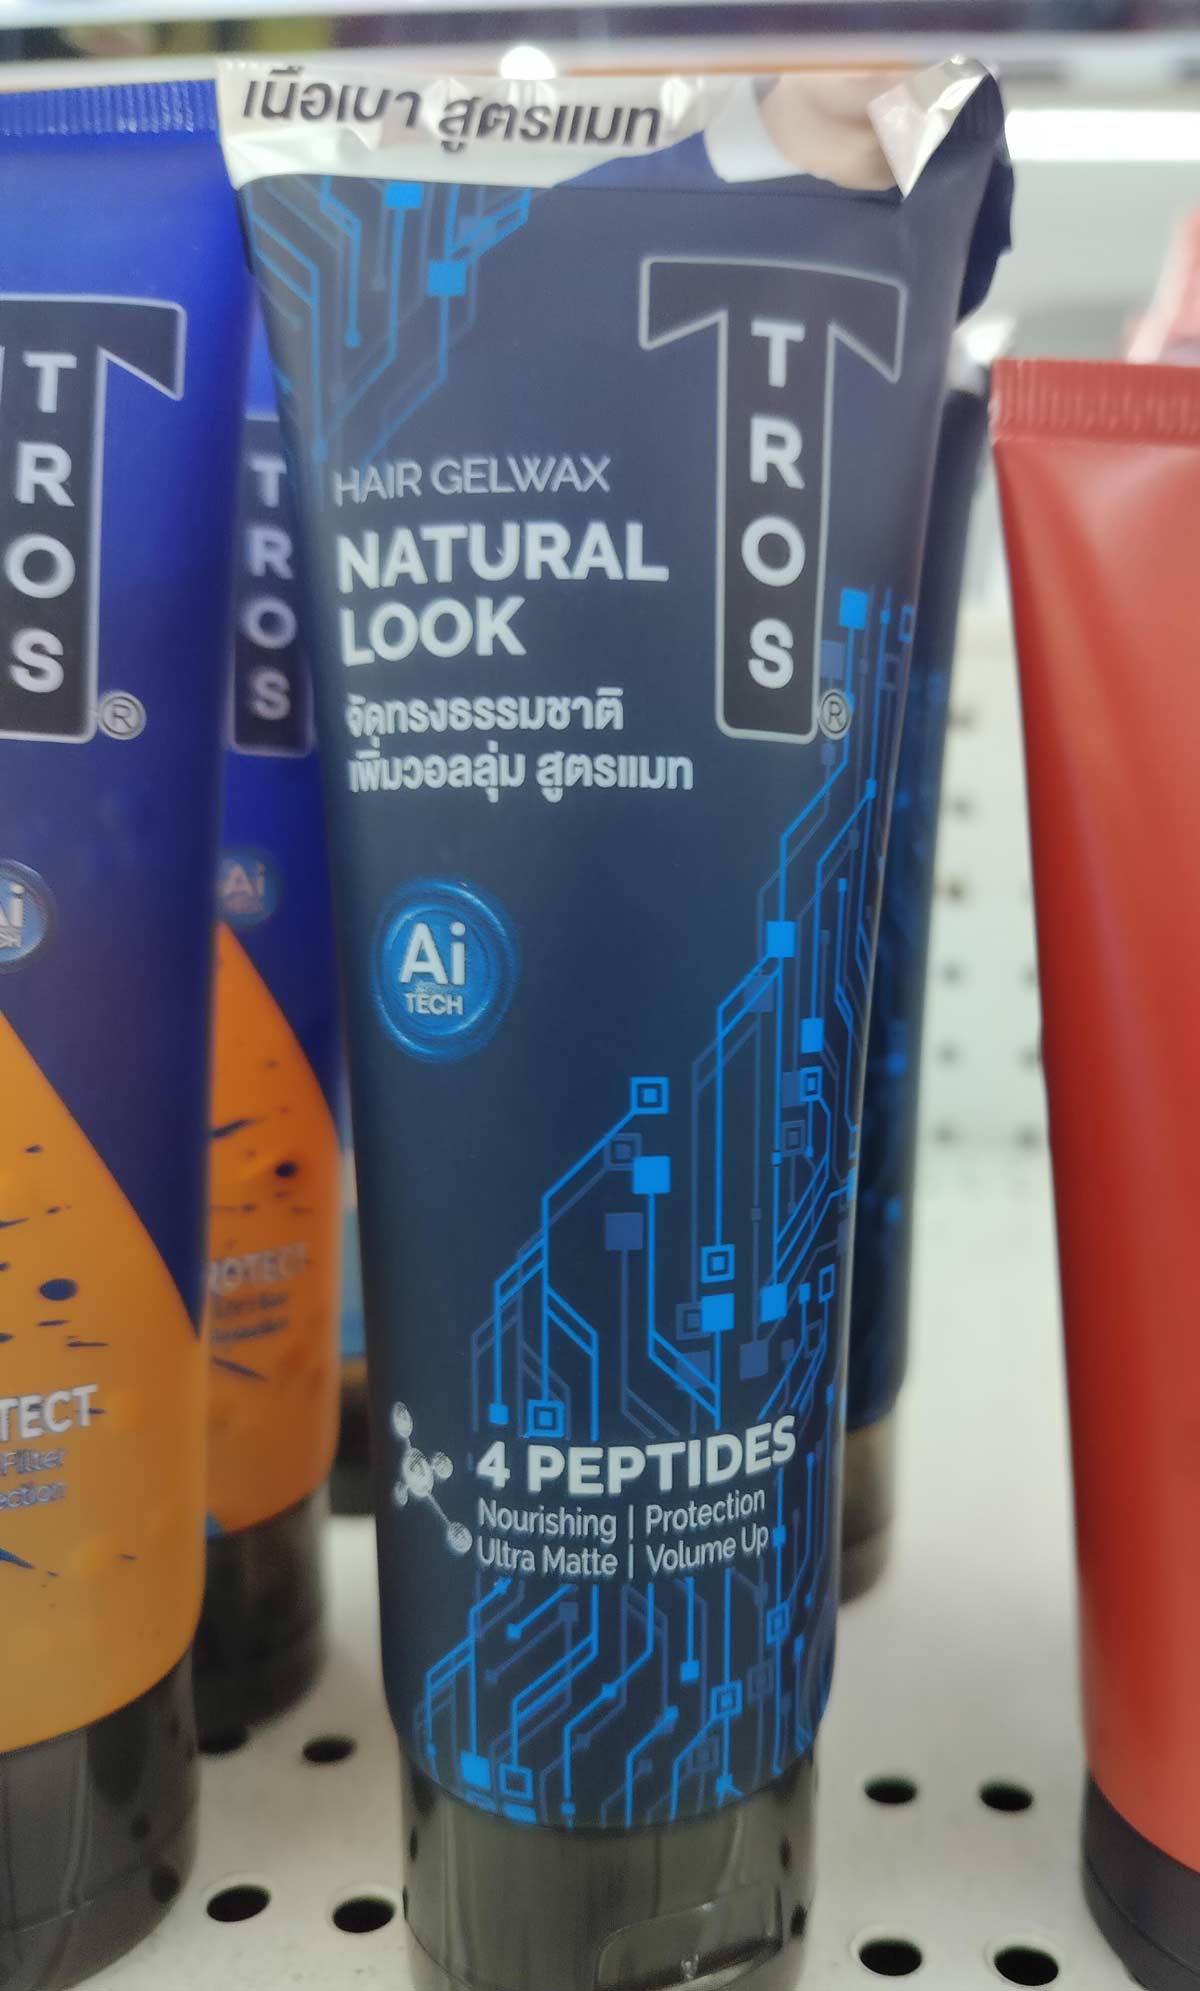 Apparently hair gels use AI now